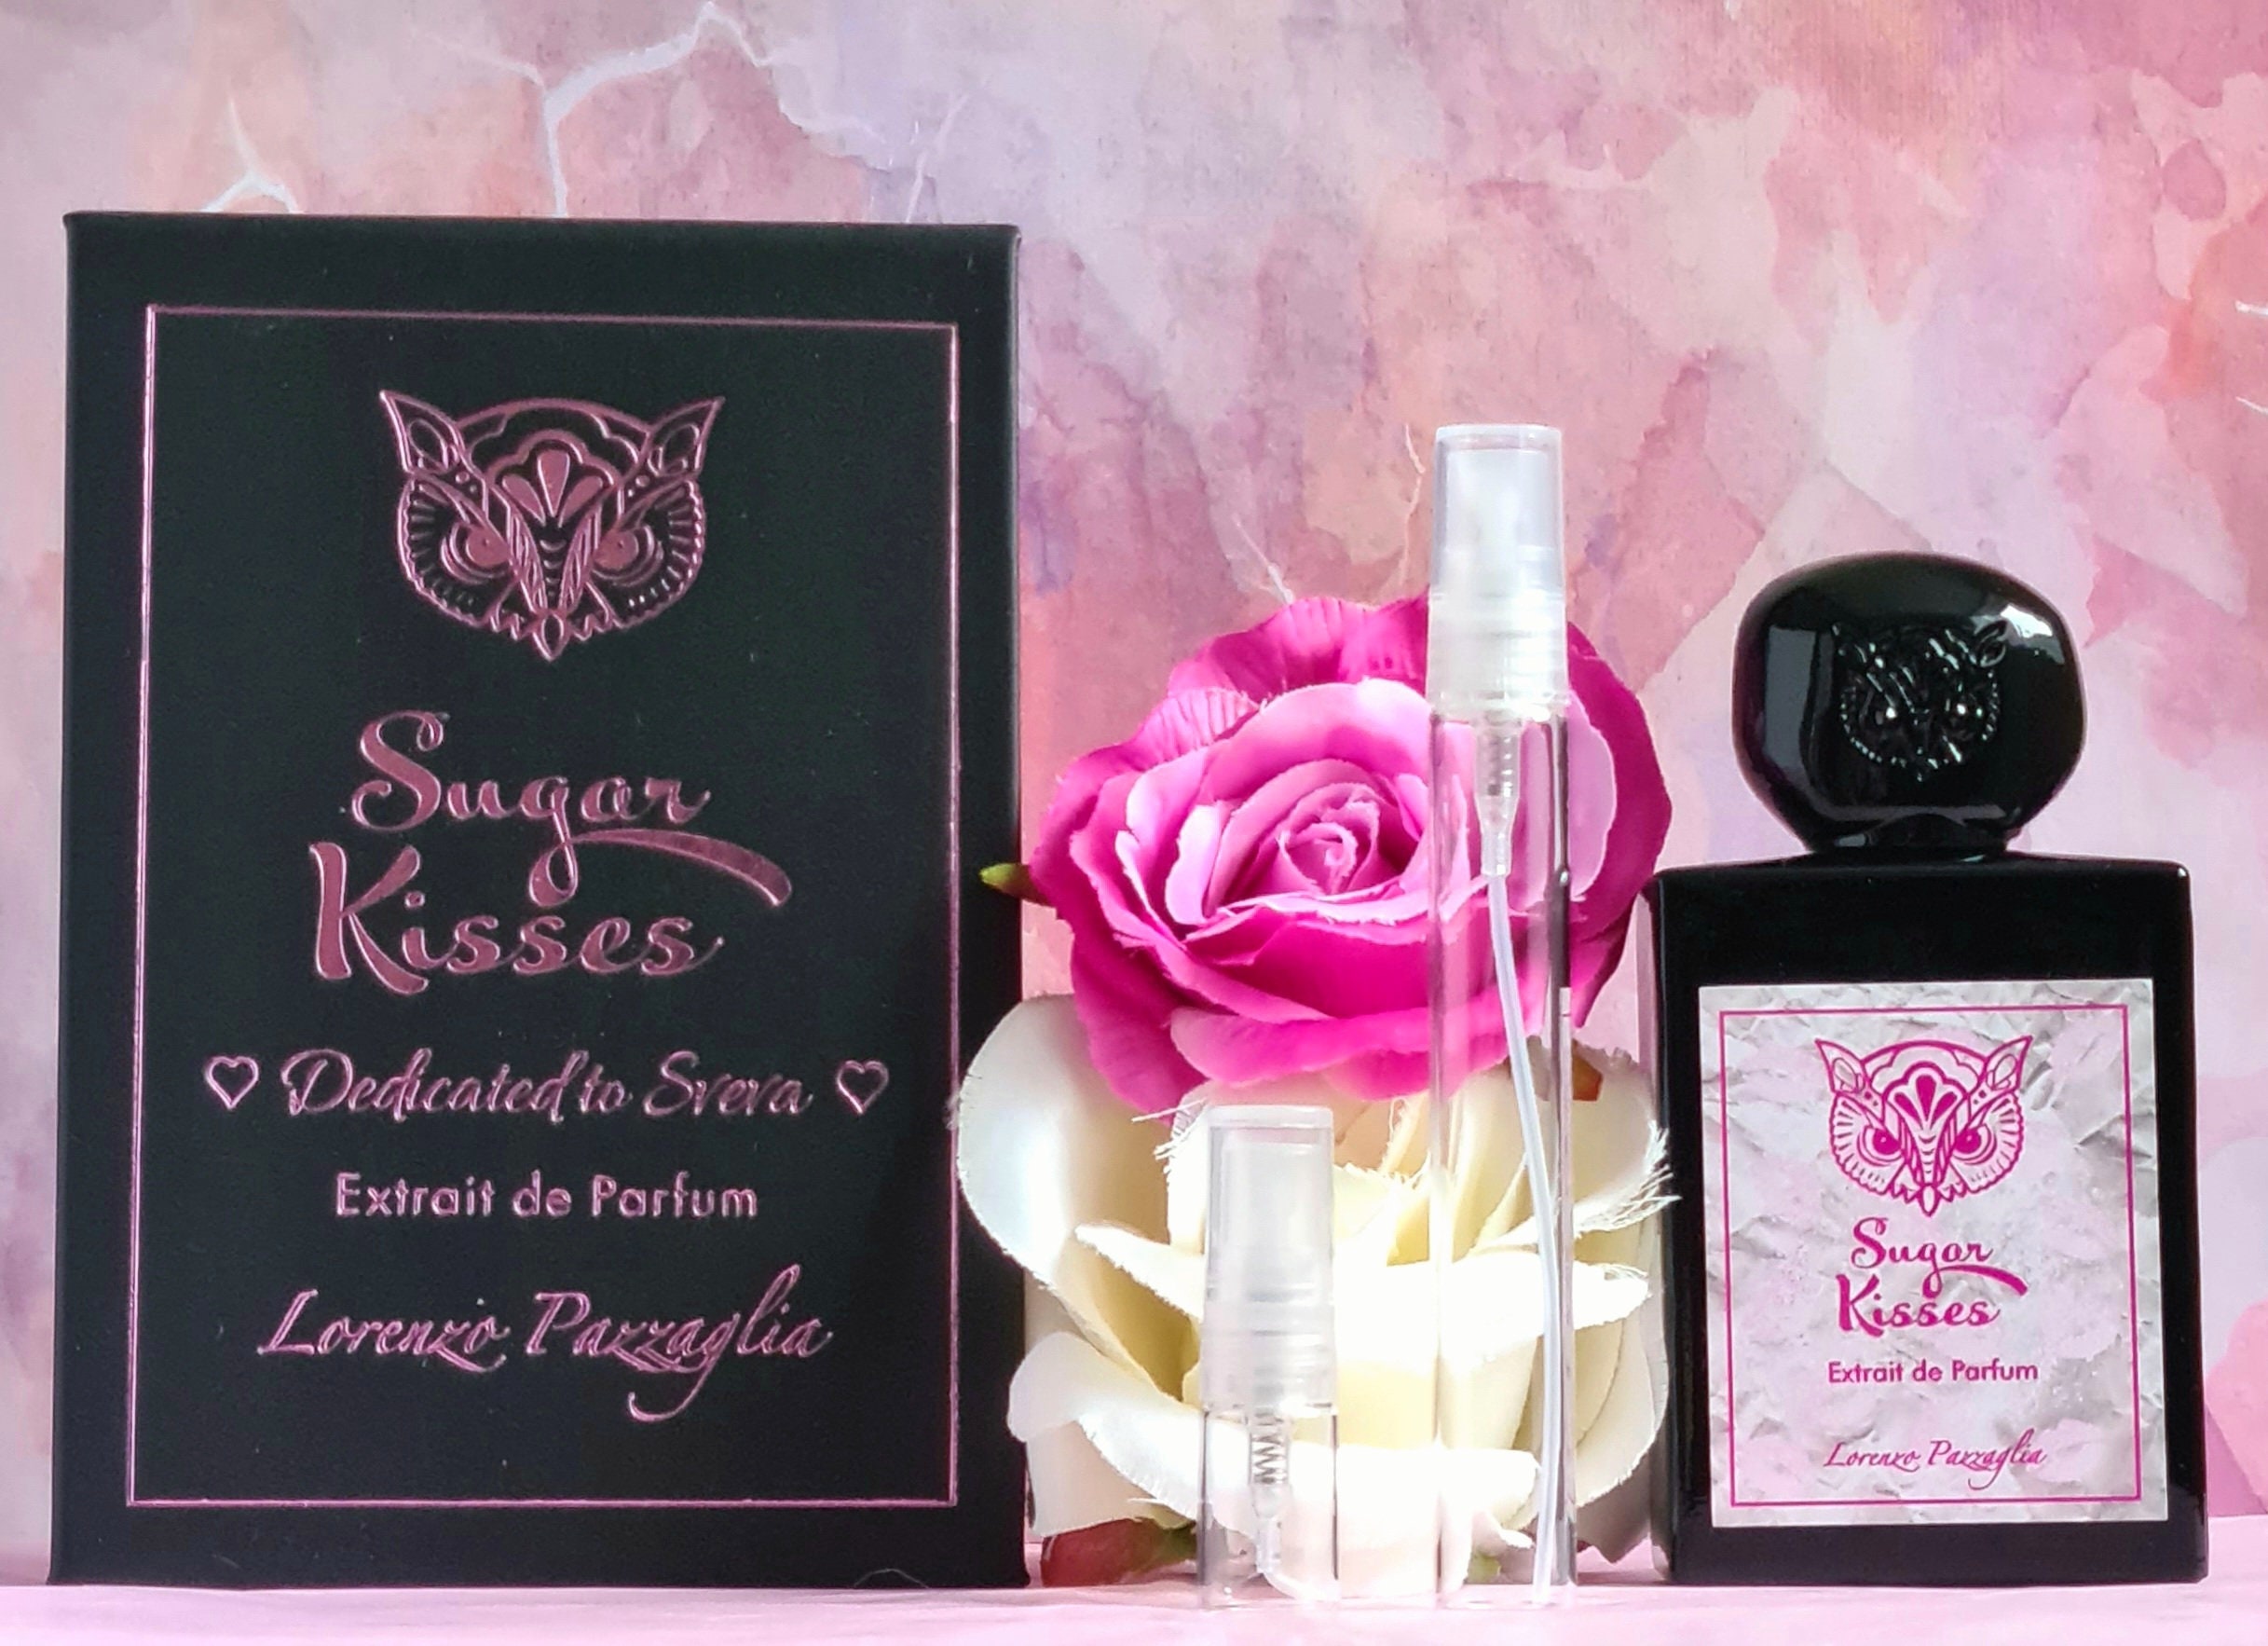 Premium Quality PINK SUGAR, Sweet Soft and Fresh Perfume Oil for Women  Without Any Alcohol, Vegan Friendly, Gift Idea 